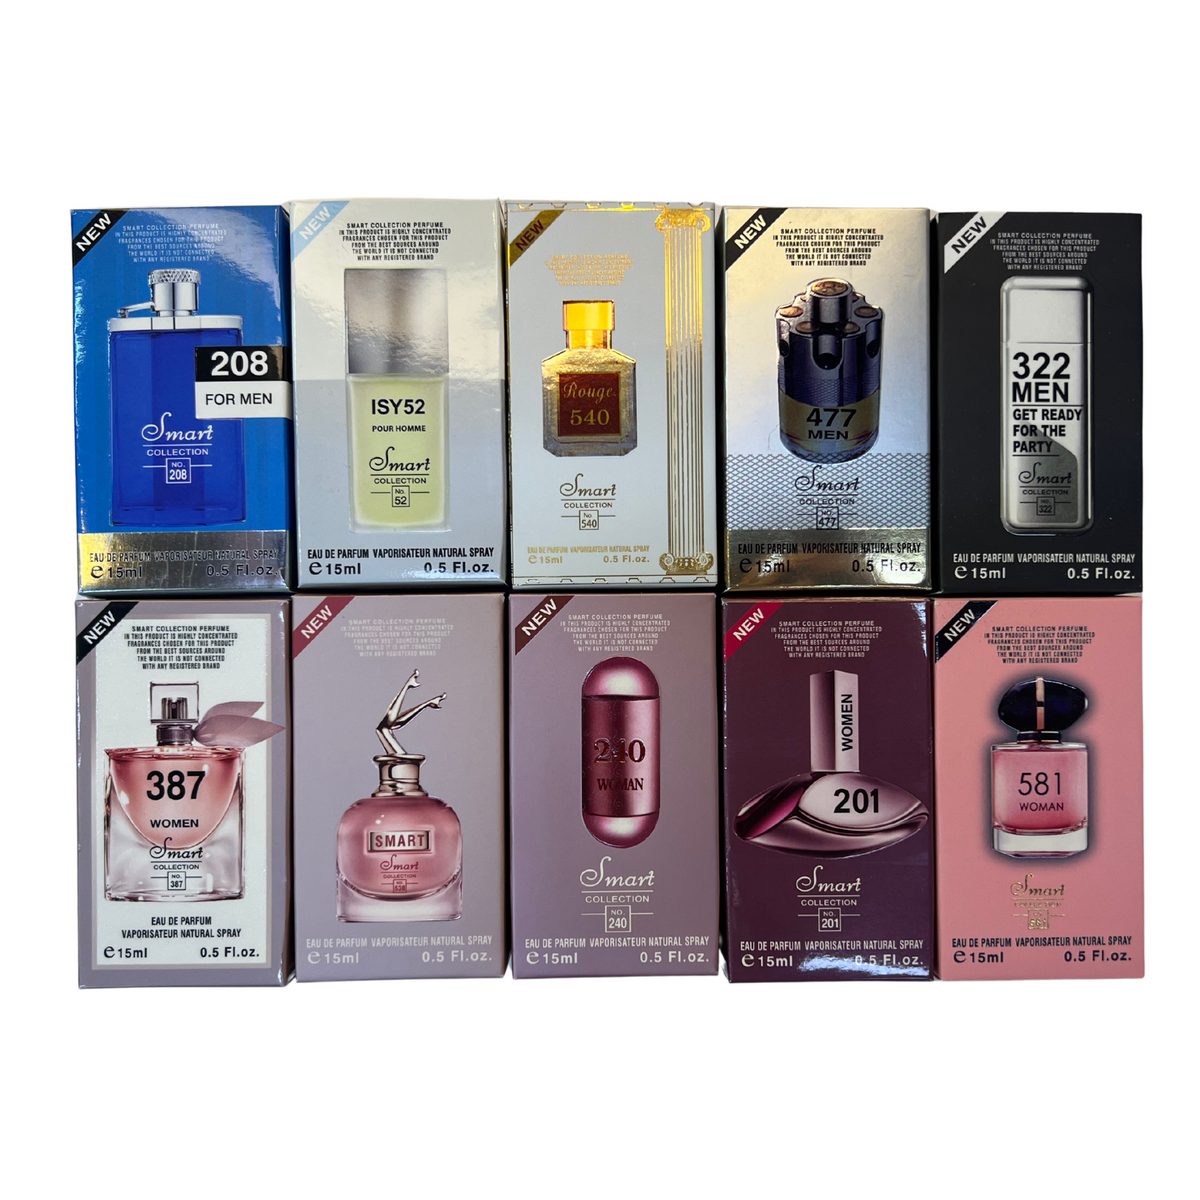 15ML Perfume bottles, 10 pieces in a combo set, 5 for men and 5 for Womens.